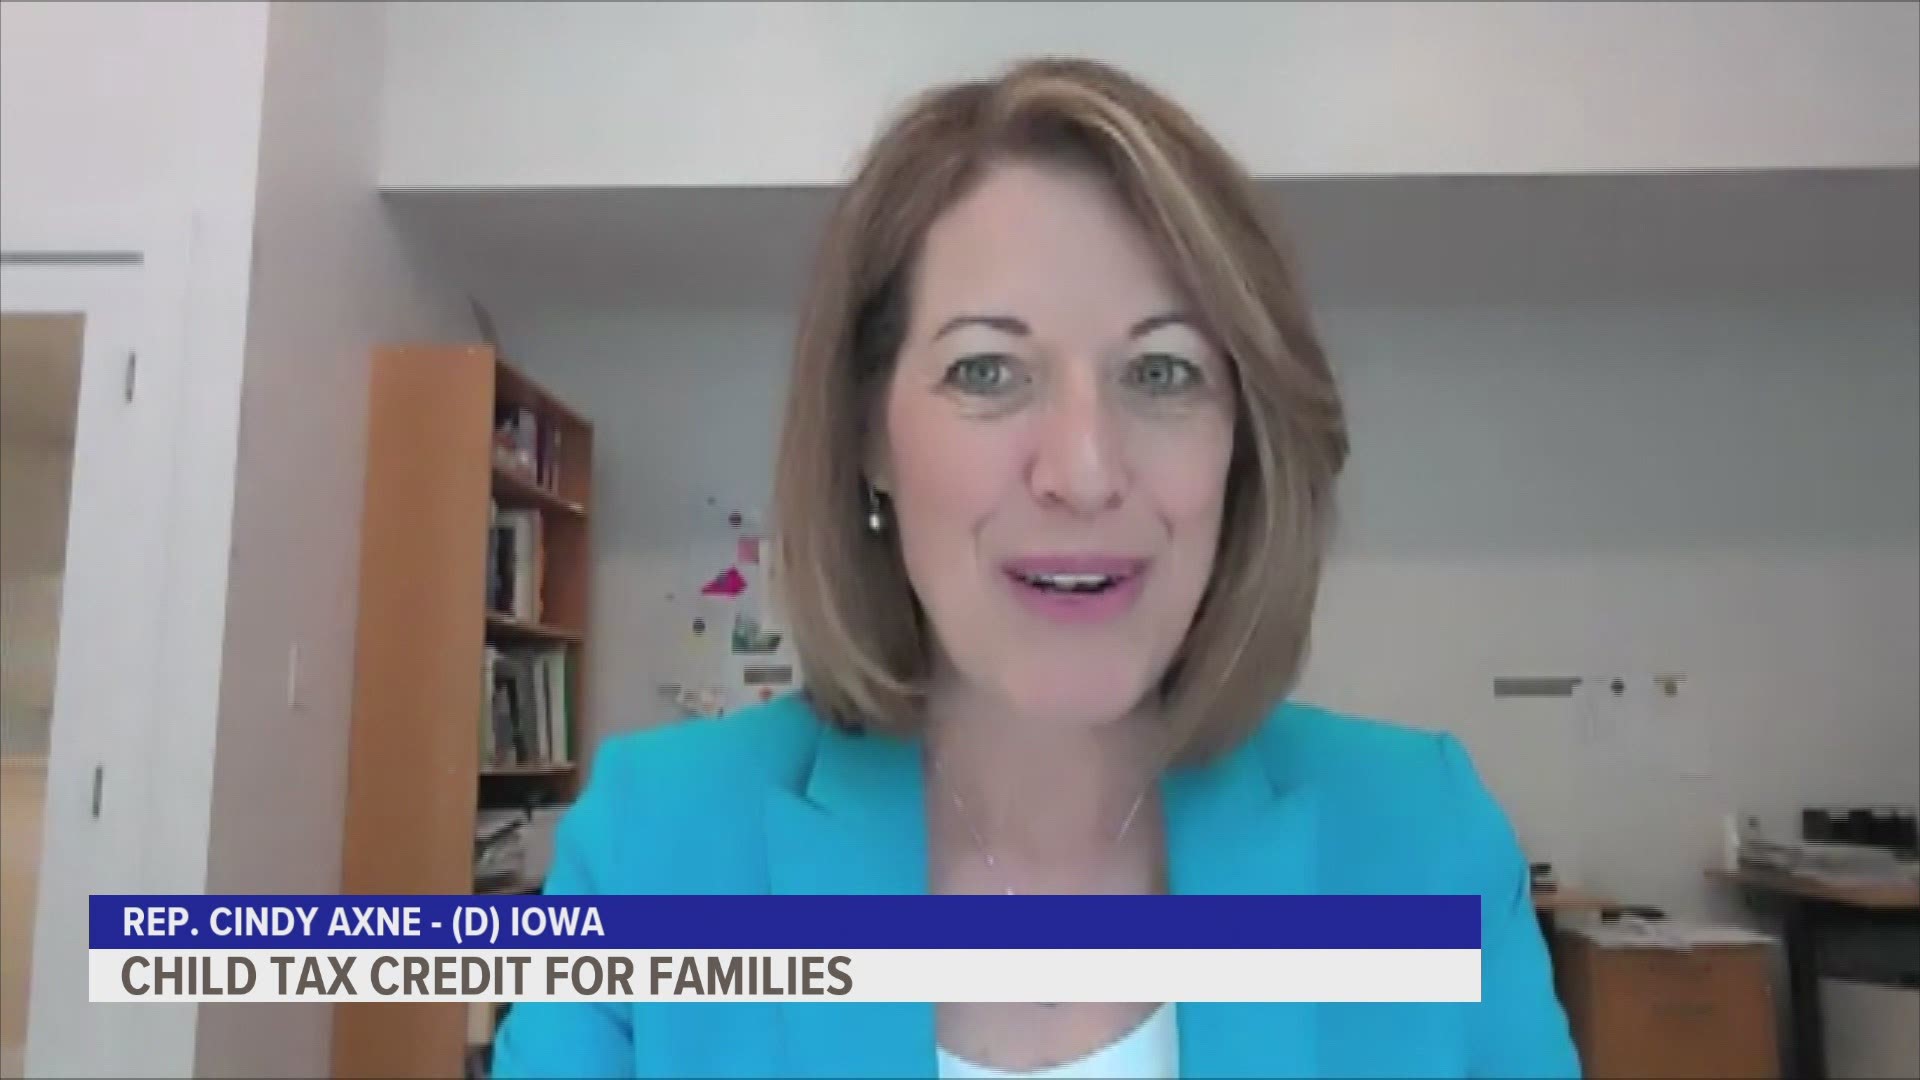 Rep. Cindy Axne shares the benefits of the monthly child tax care credit payments